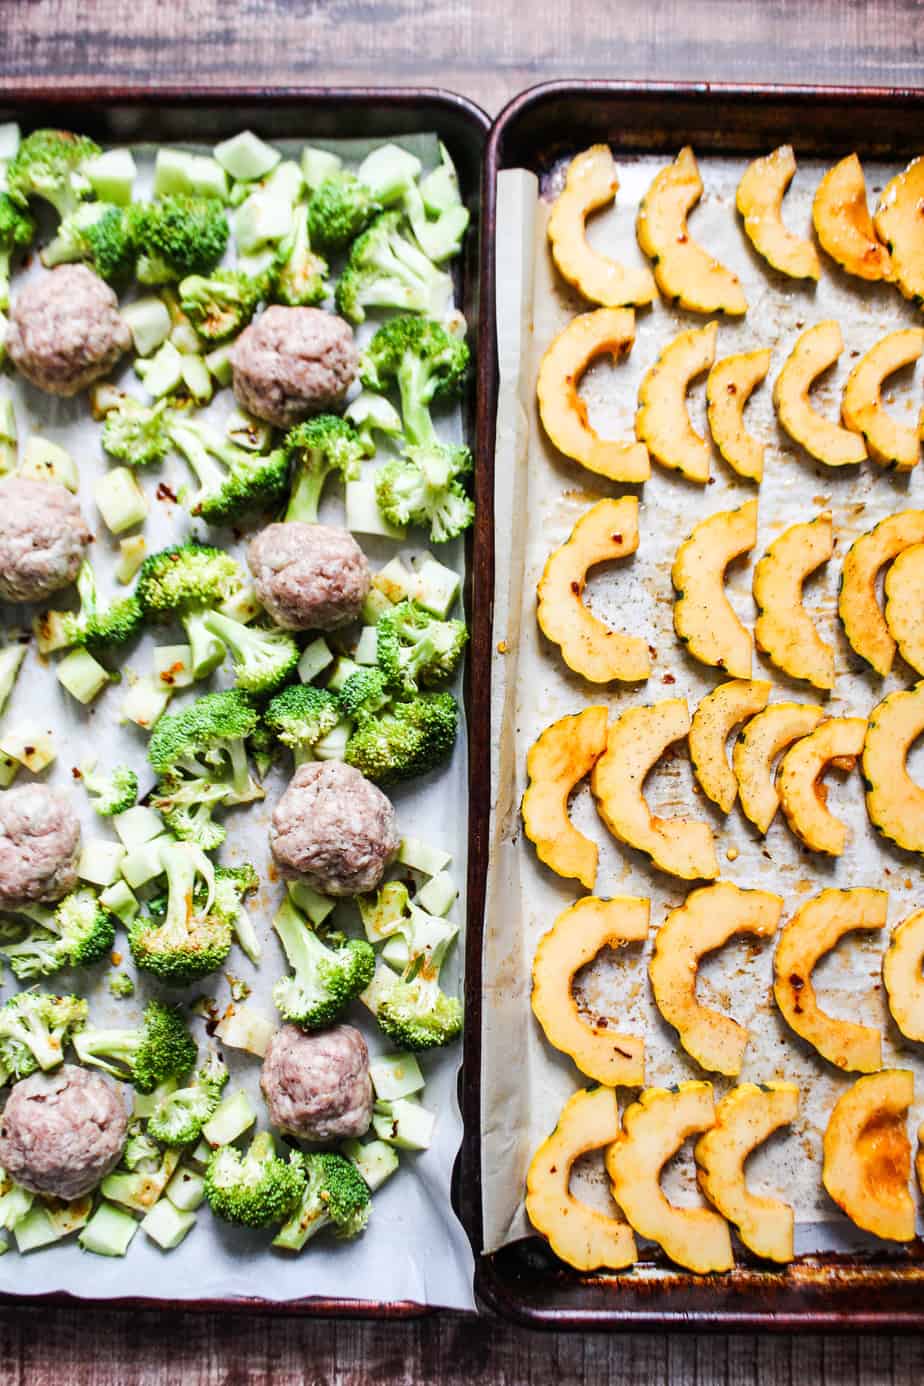 two sheetpans side by side, one with broccoli florets and sausage meatballs, the other with sliced delicata squash